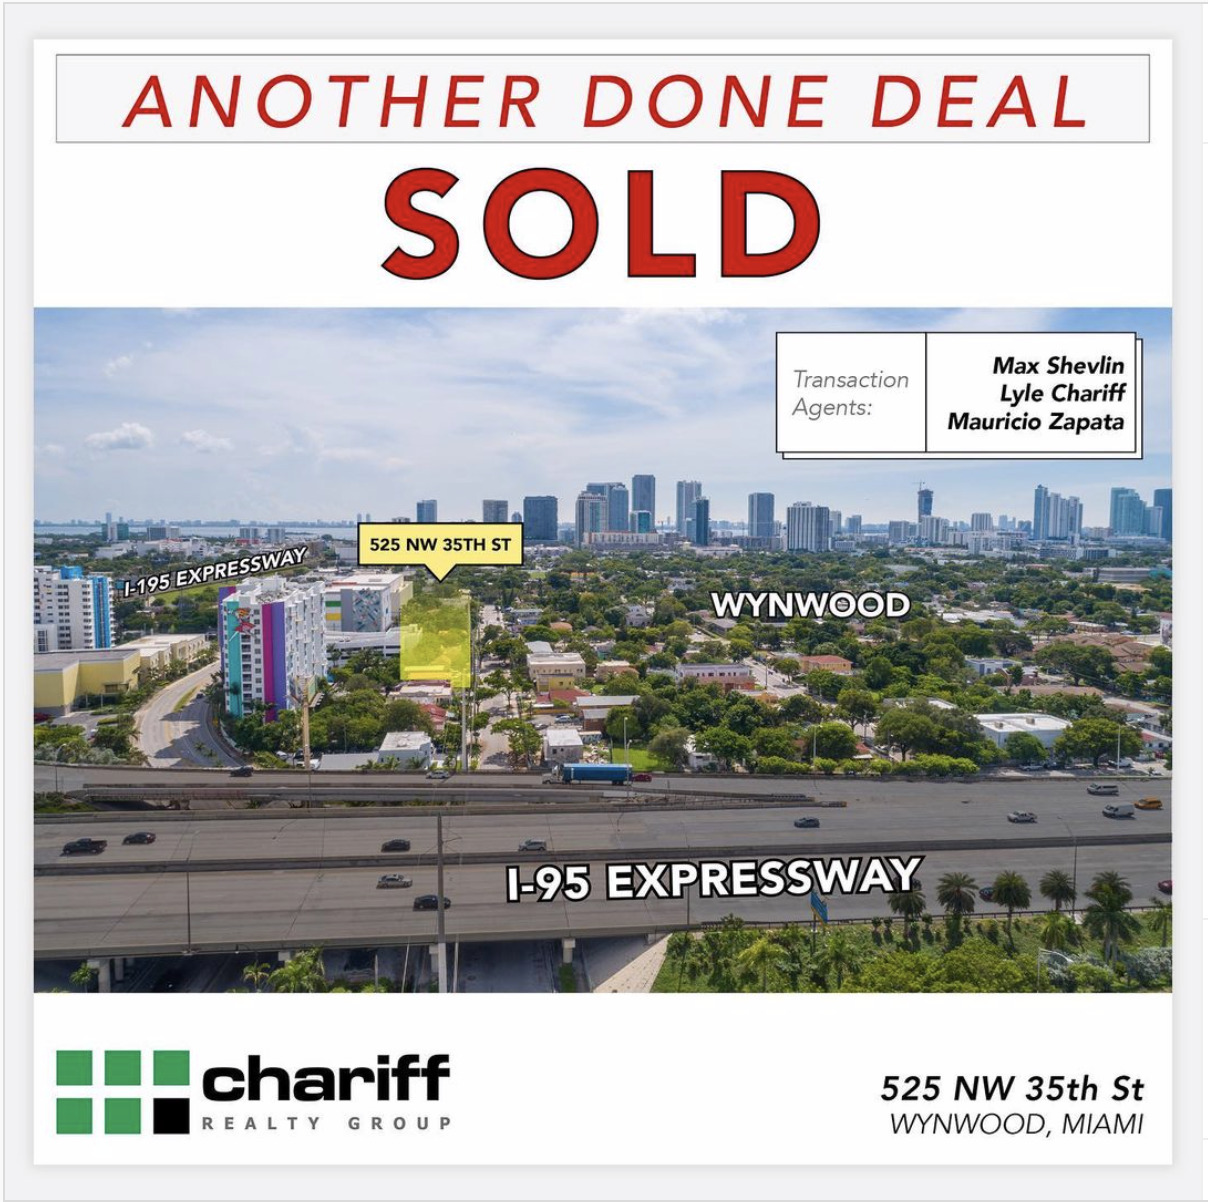 525 NW 35th St - Allapattah - Miami - Florida - Another Done Deal Sold - Chariff Realty Group